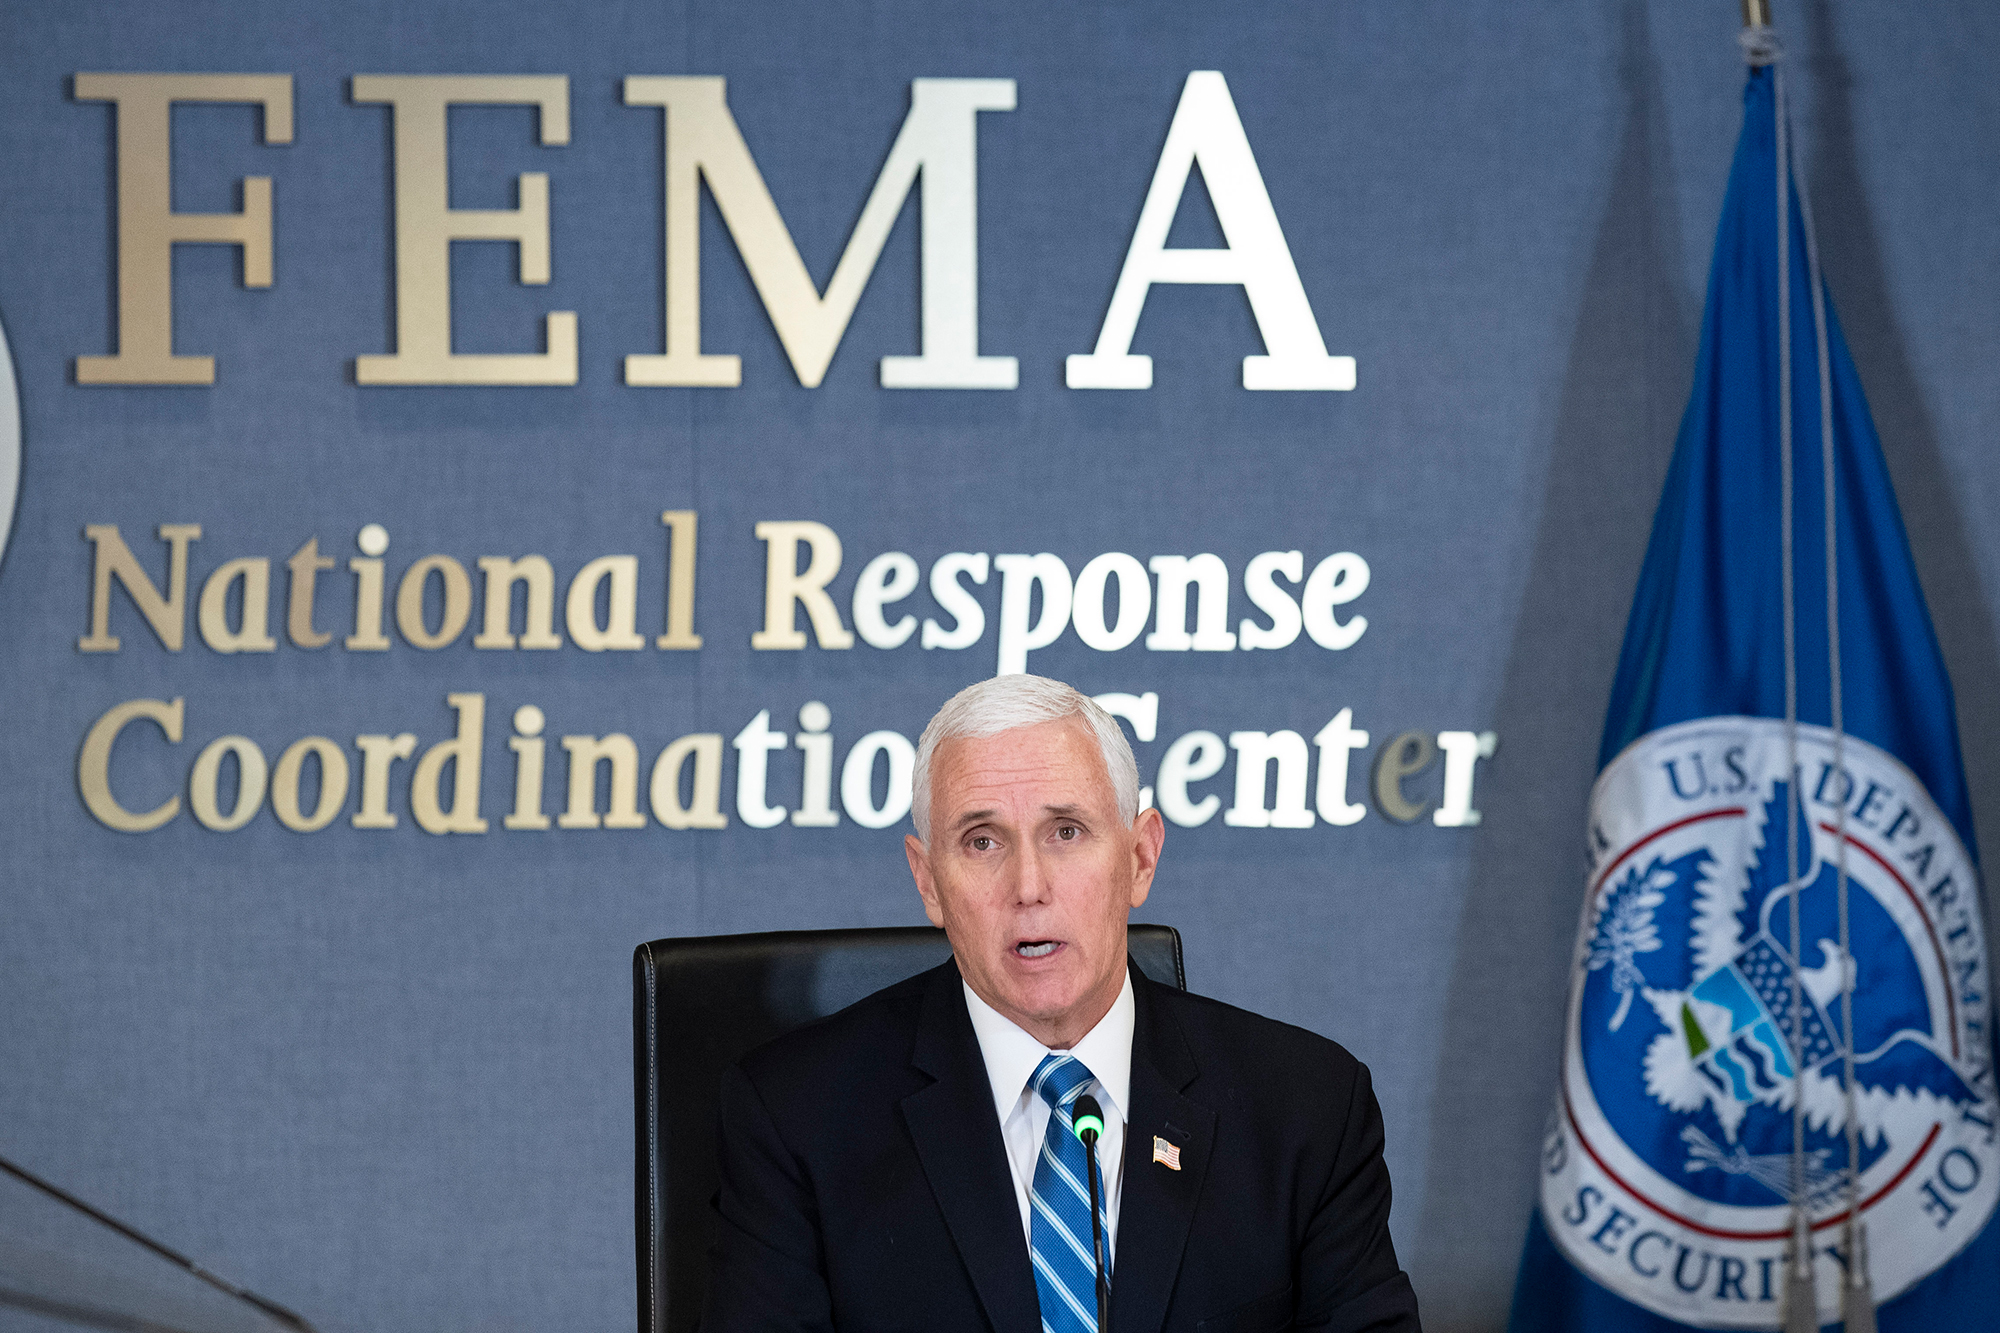 Vice President Mike Pence speaks as he leads a video teleconference with governors about the coronavirus during a trip to FEMA on Monday, March 23, in Washington.